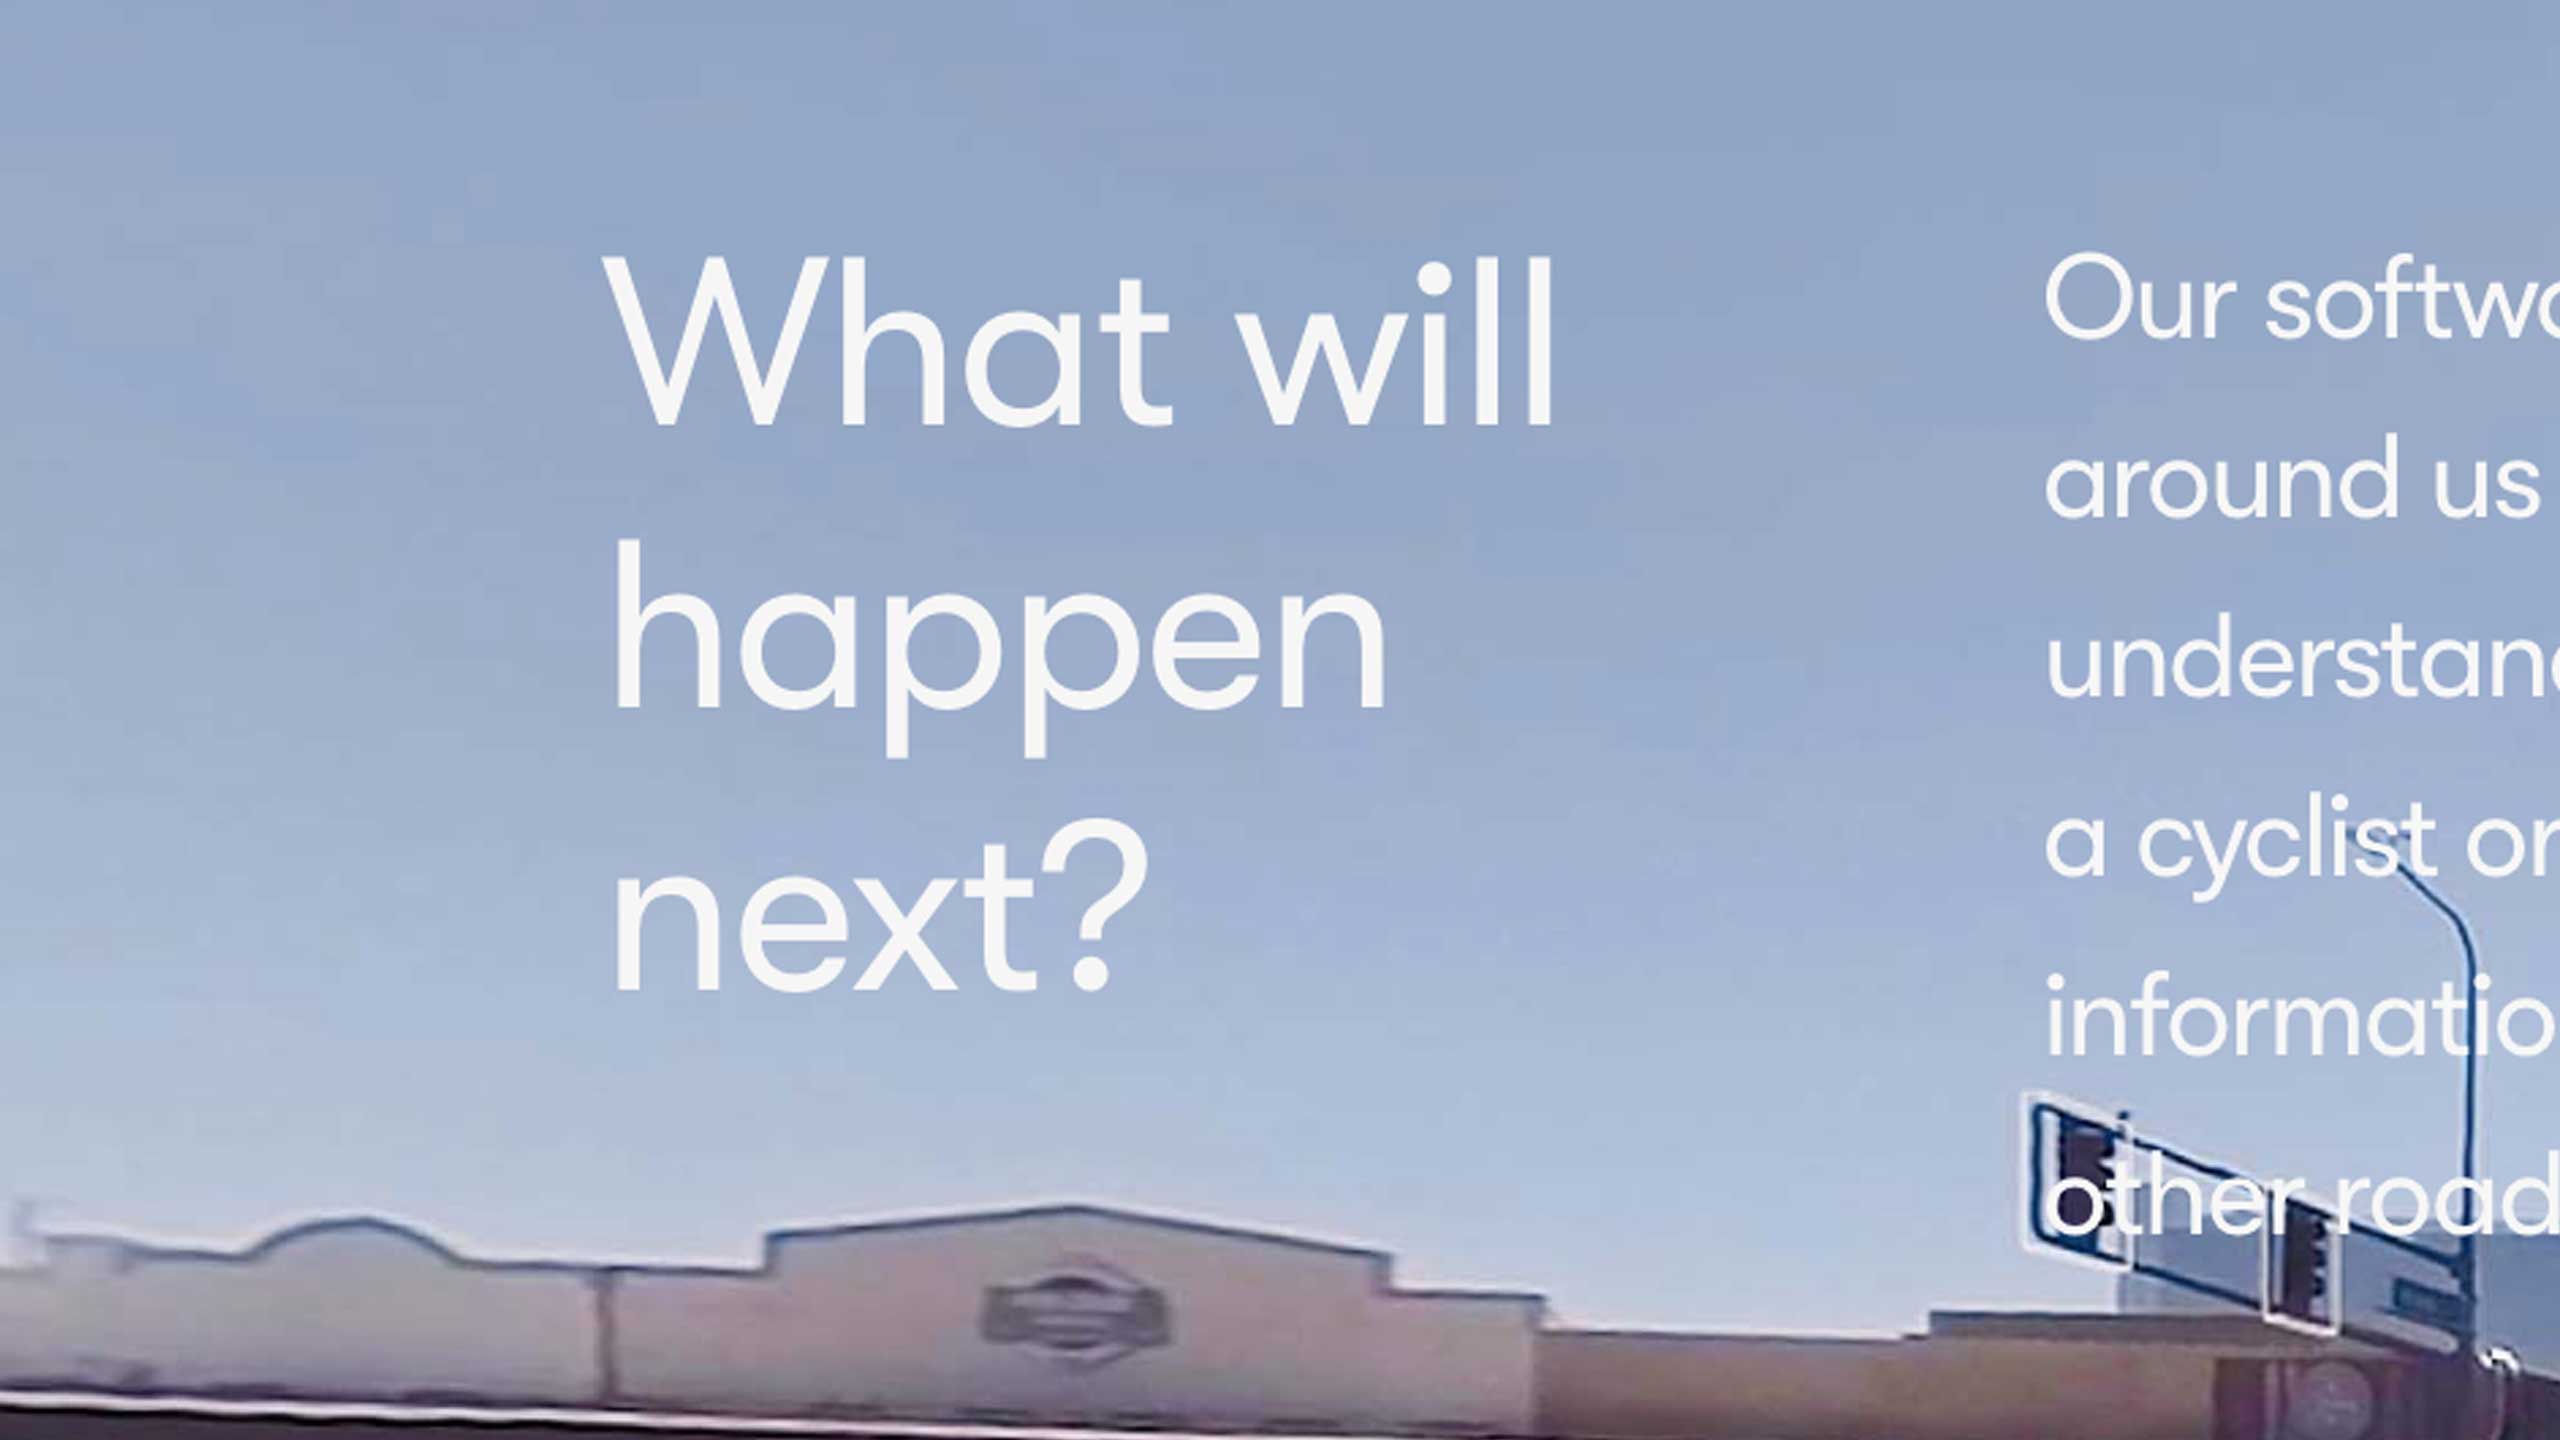 Words saying "What will happen next?" appear over a zoomed-in photo with visible pixelation